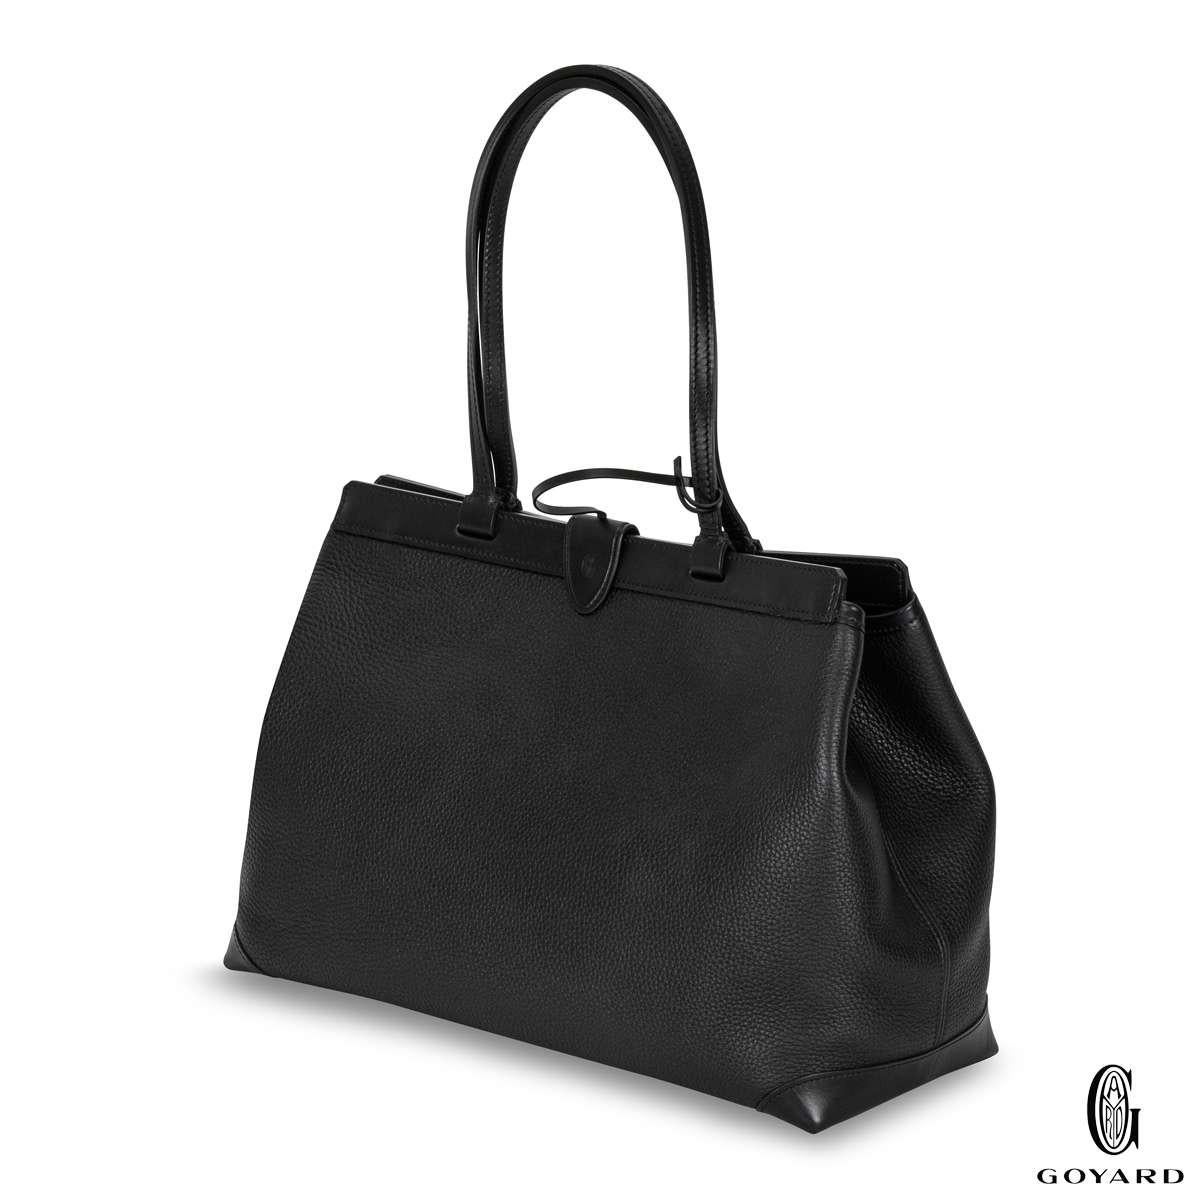 A lovely Bellechasse Biaude PM handbag by Goyard from the Bellechasse Biaude collection. The exterior is crafted in black Decize Taurillon leather & Cervon calfskin leather with palladium hardware and a removable croc hook. The interior features a